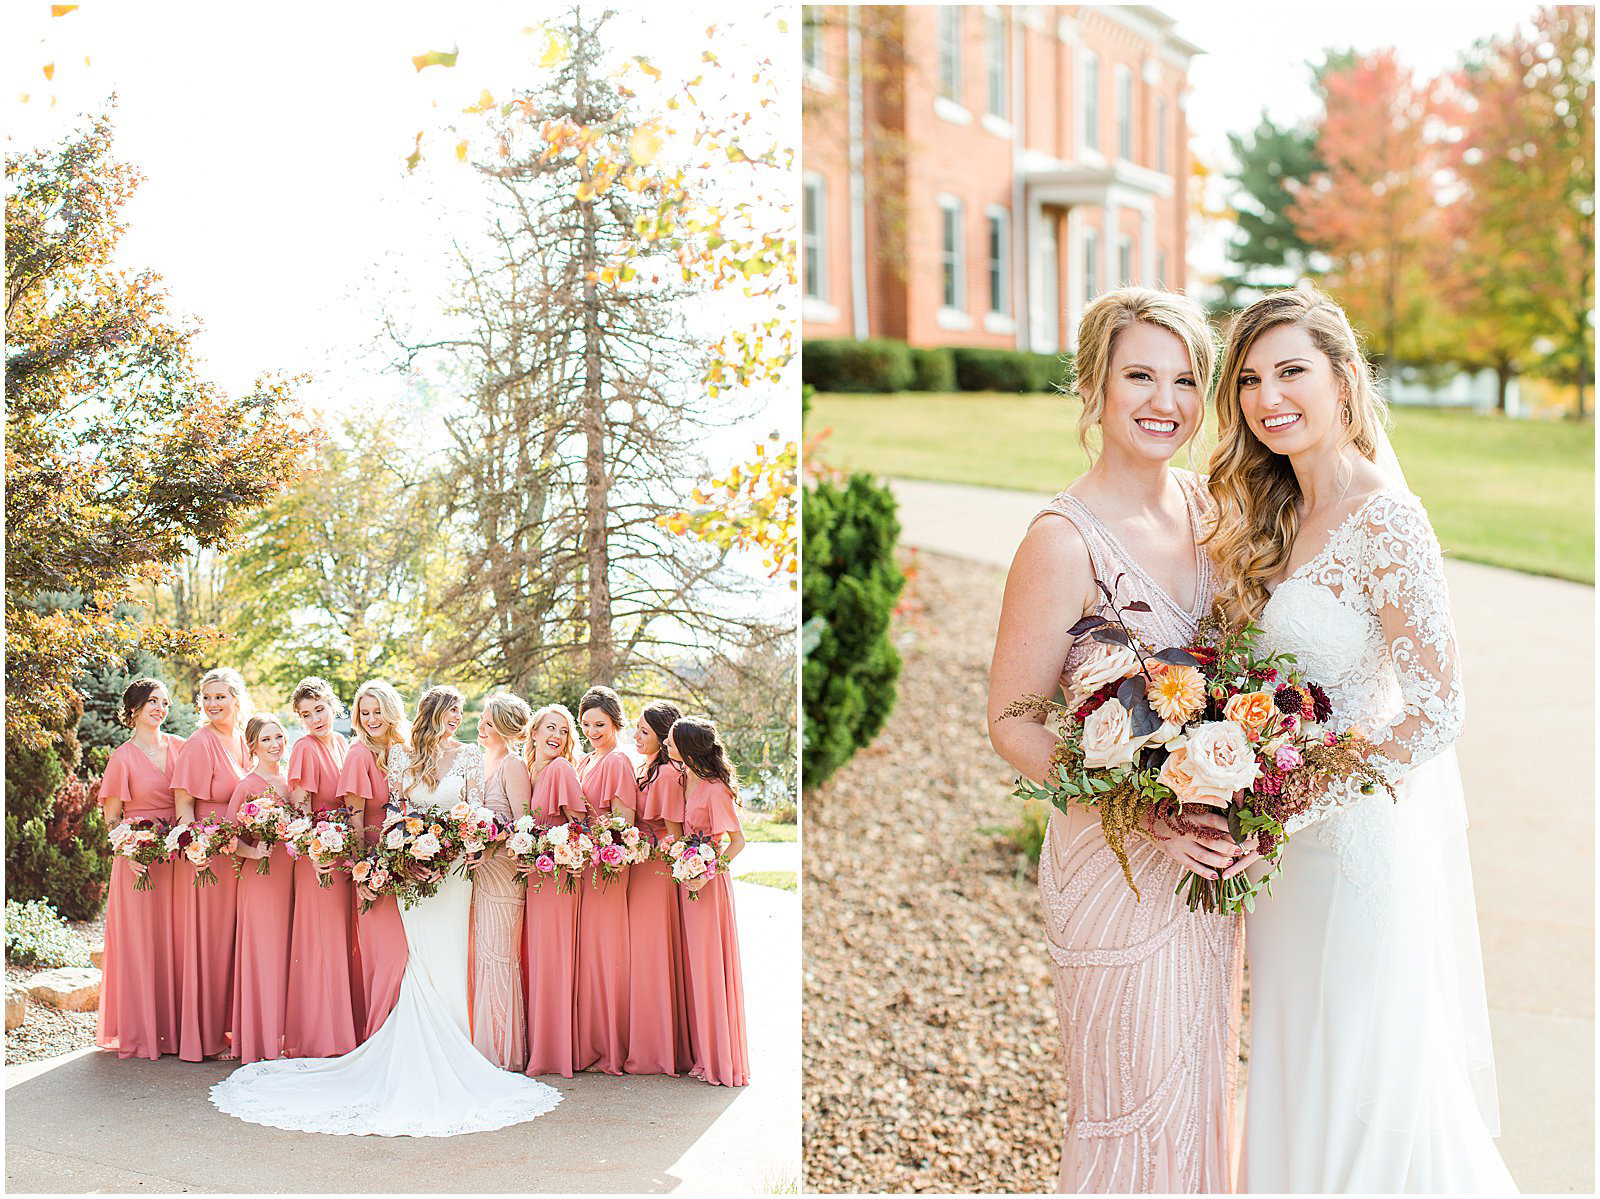 A Romantic Fall Wedding in Ferdinand, IN | Tori and Kyle | Bret and Brandie Photography 0106.jpg